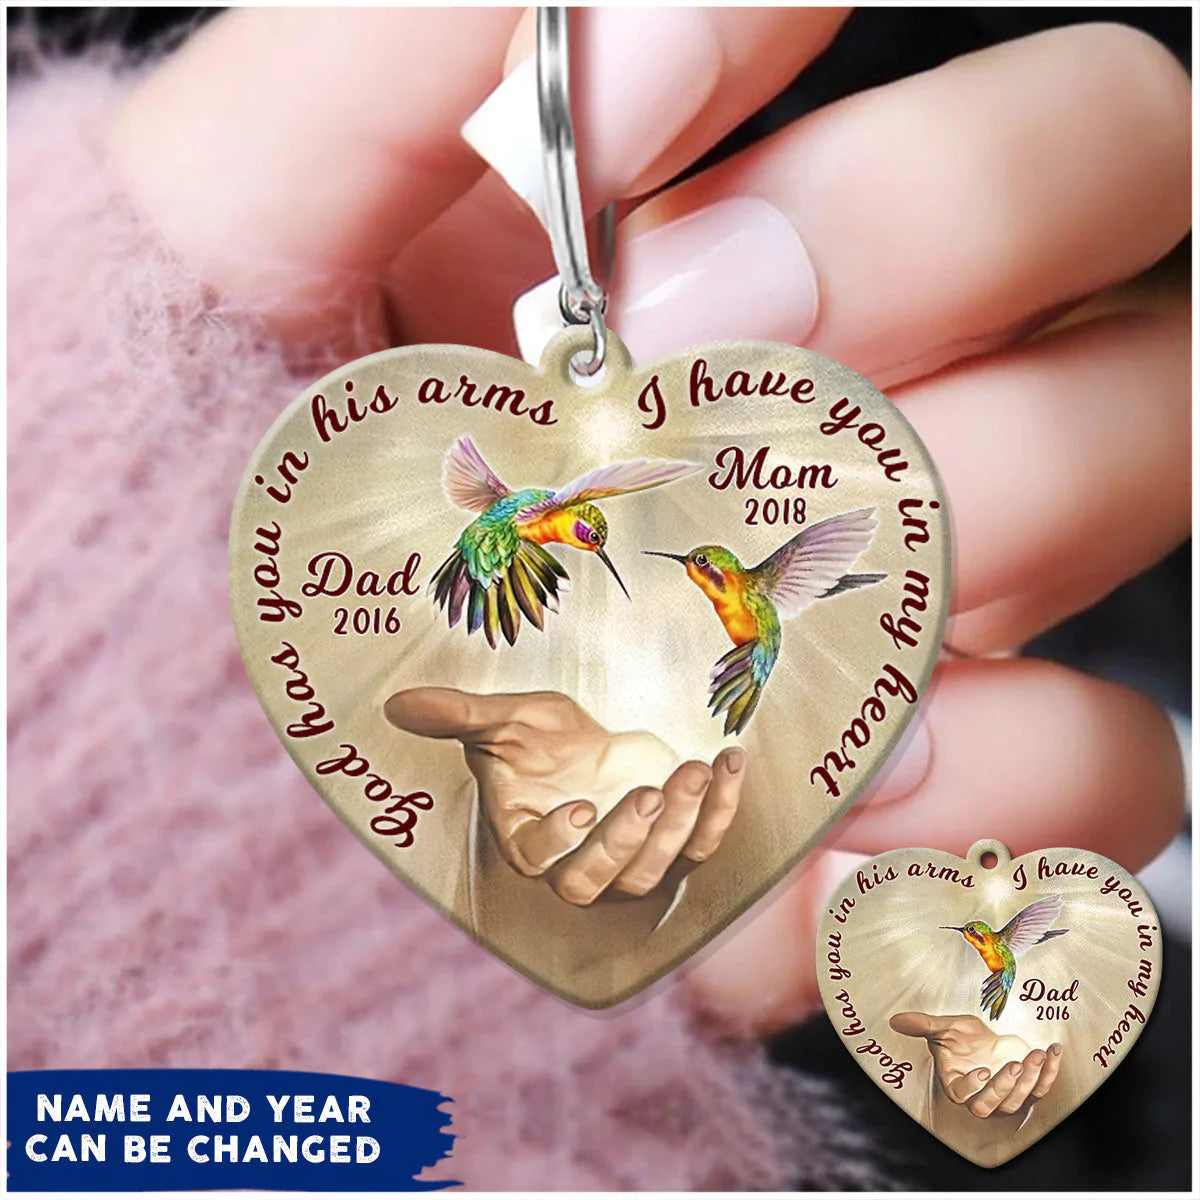 Personalized God Has You In His Arms, I Have You In My Heart Memorial Acrylic Keychain